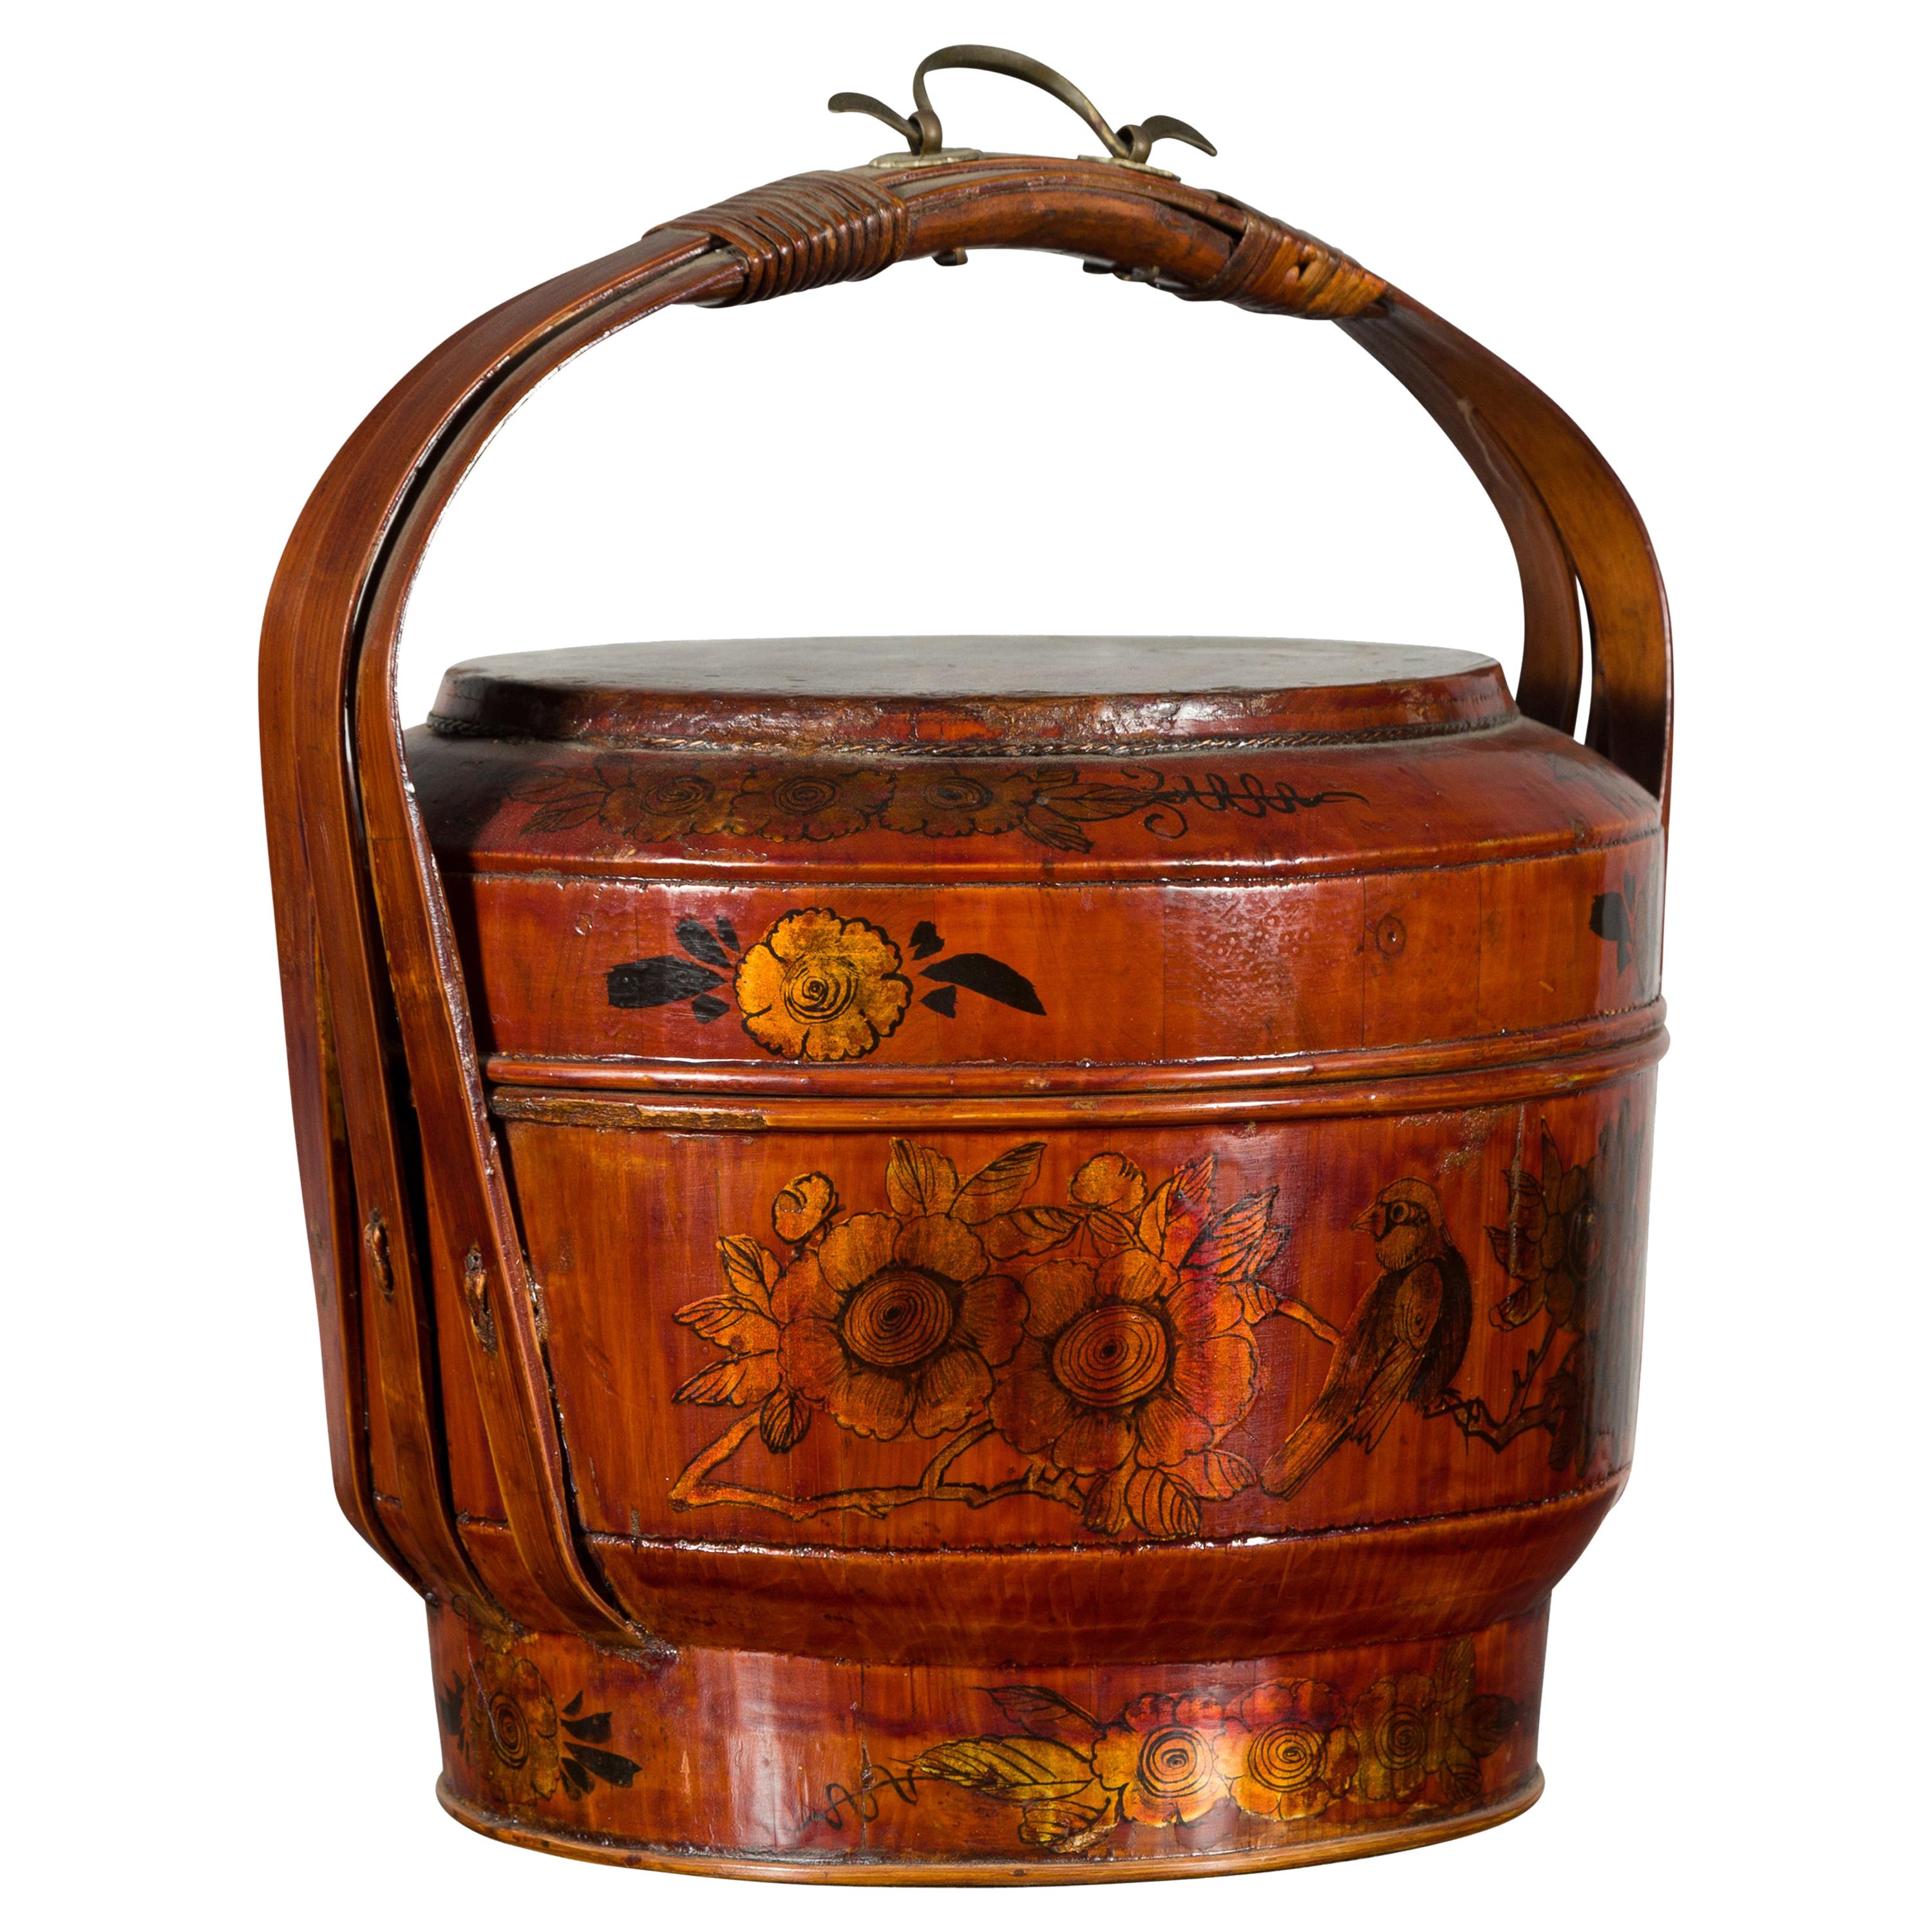 Chinese Early 20th Century Lidded Picnic Basket with Painted Birds and Flowers